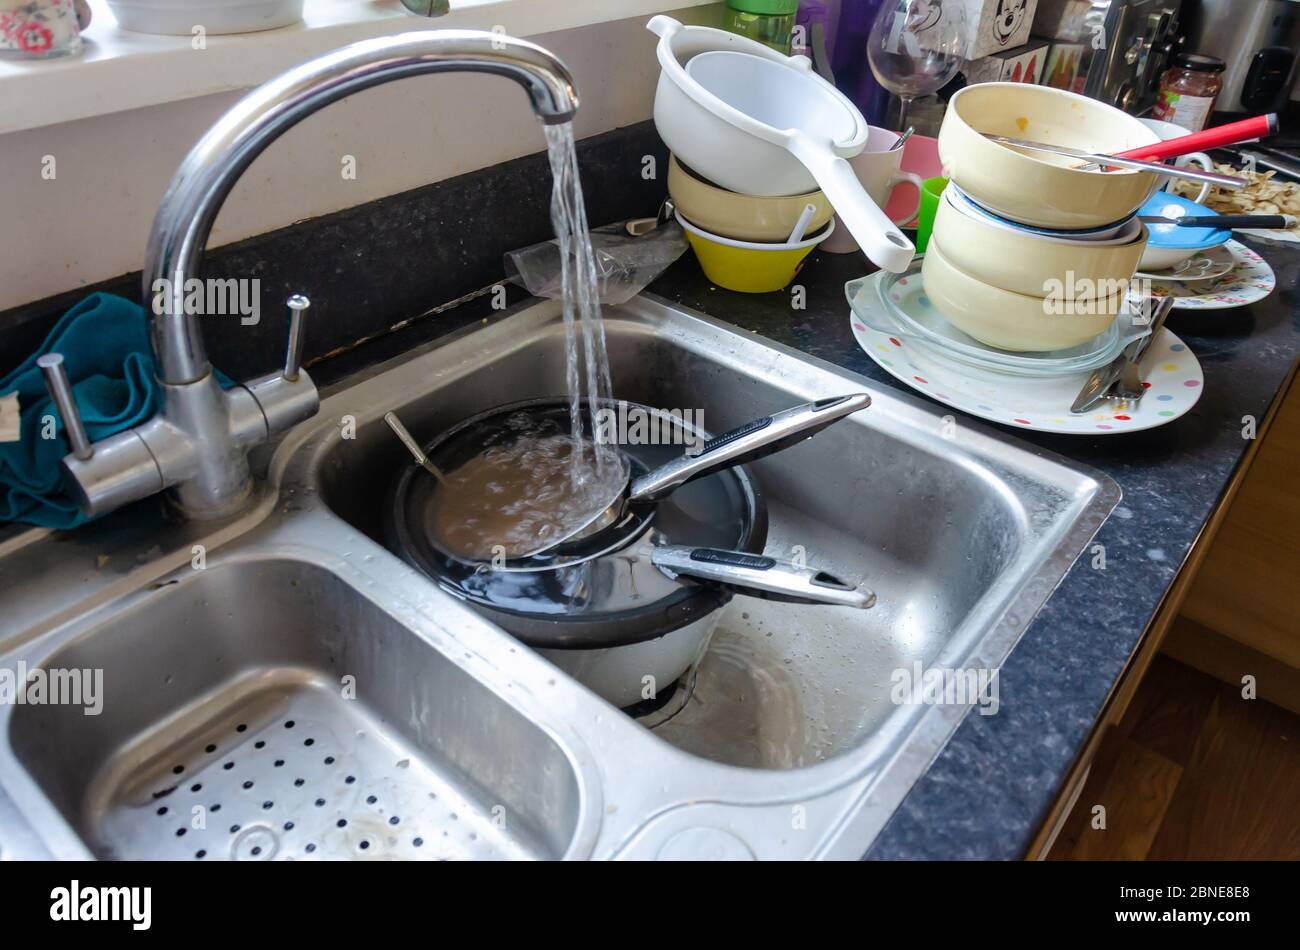 Running water from a tap fills saucepans soaking in a kitchen sink. Dishes are stacked ready to wash up. Stock Photo